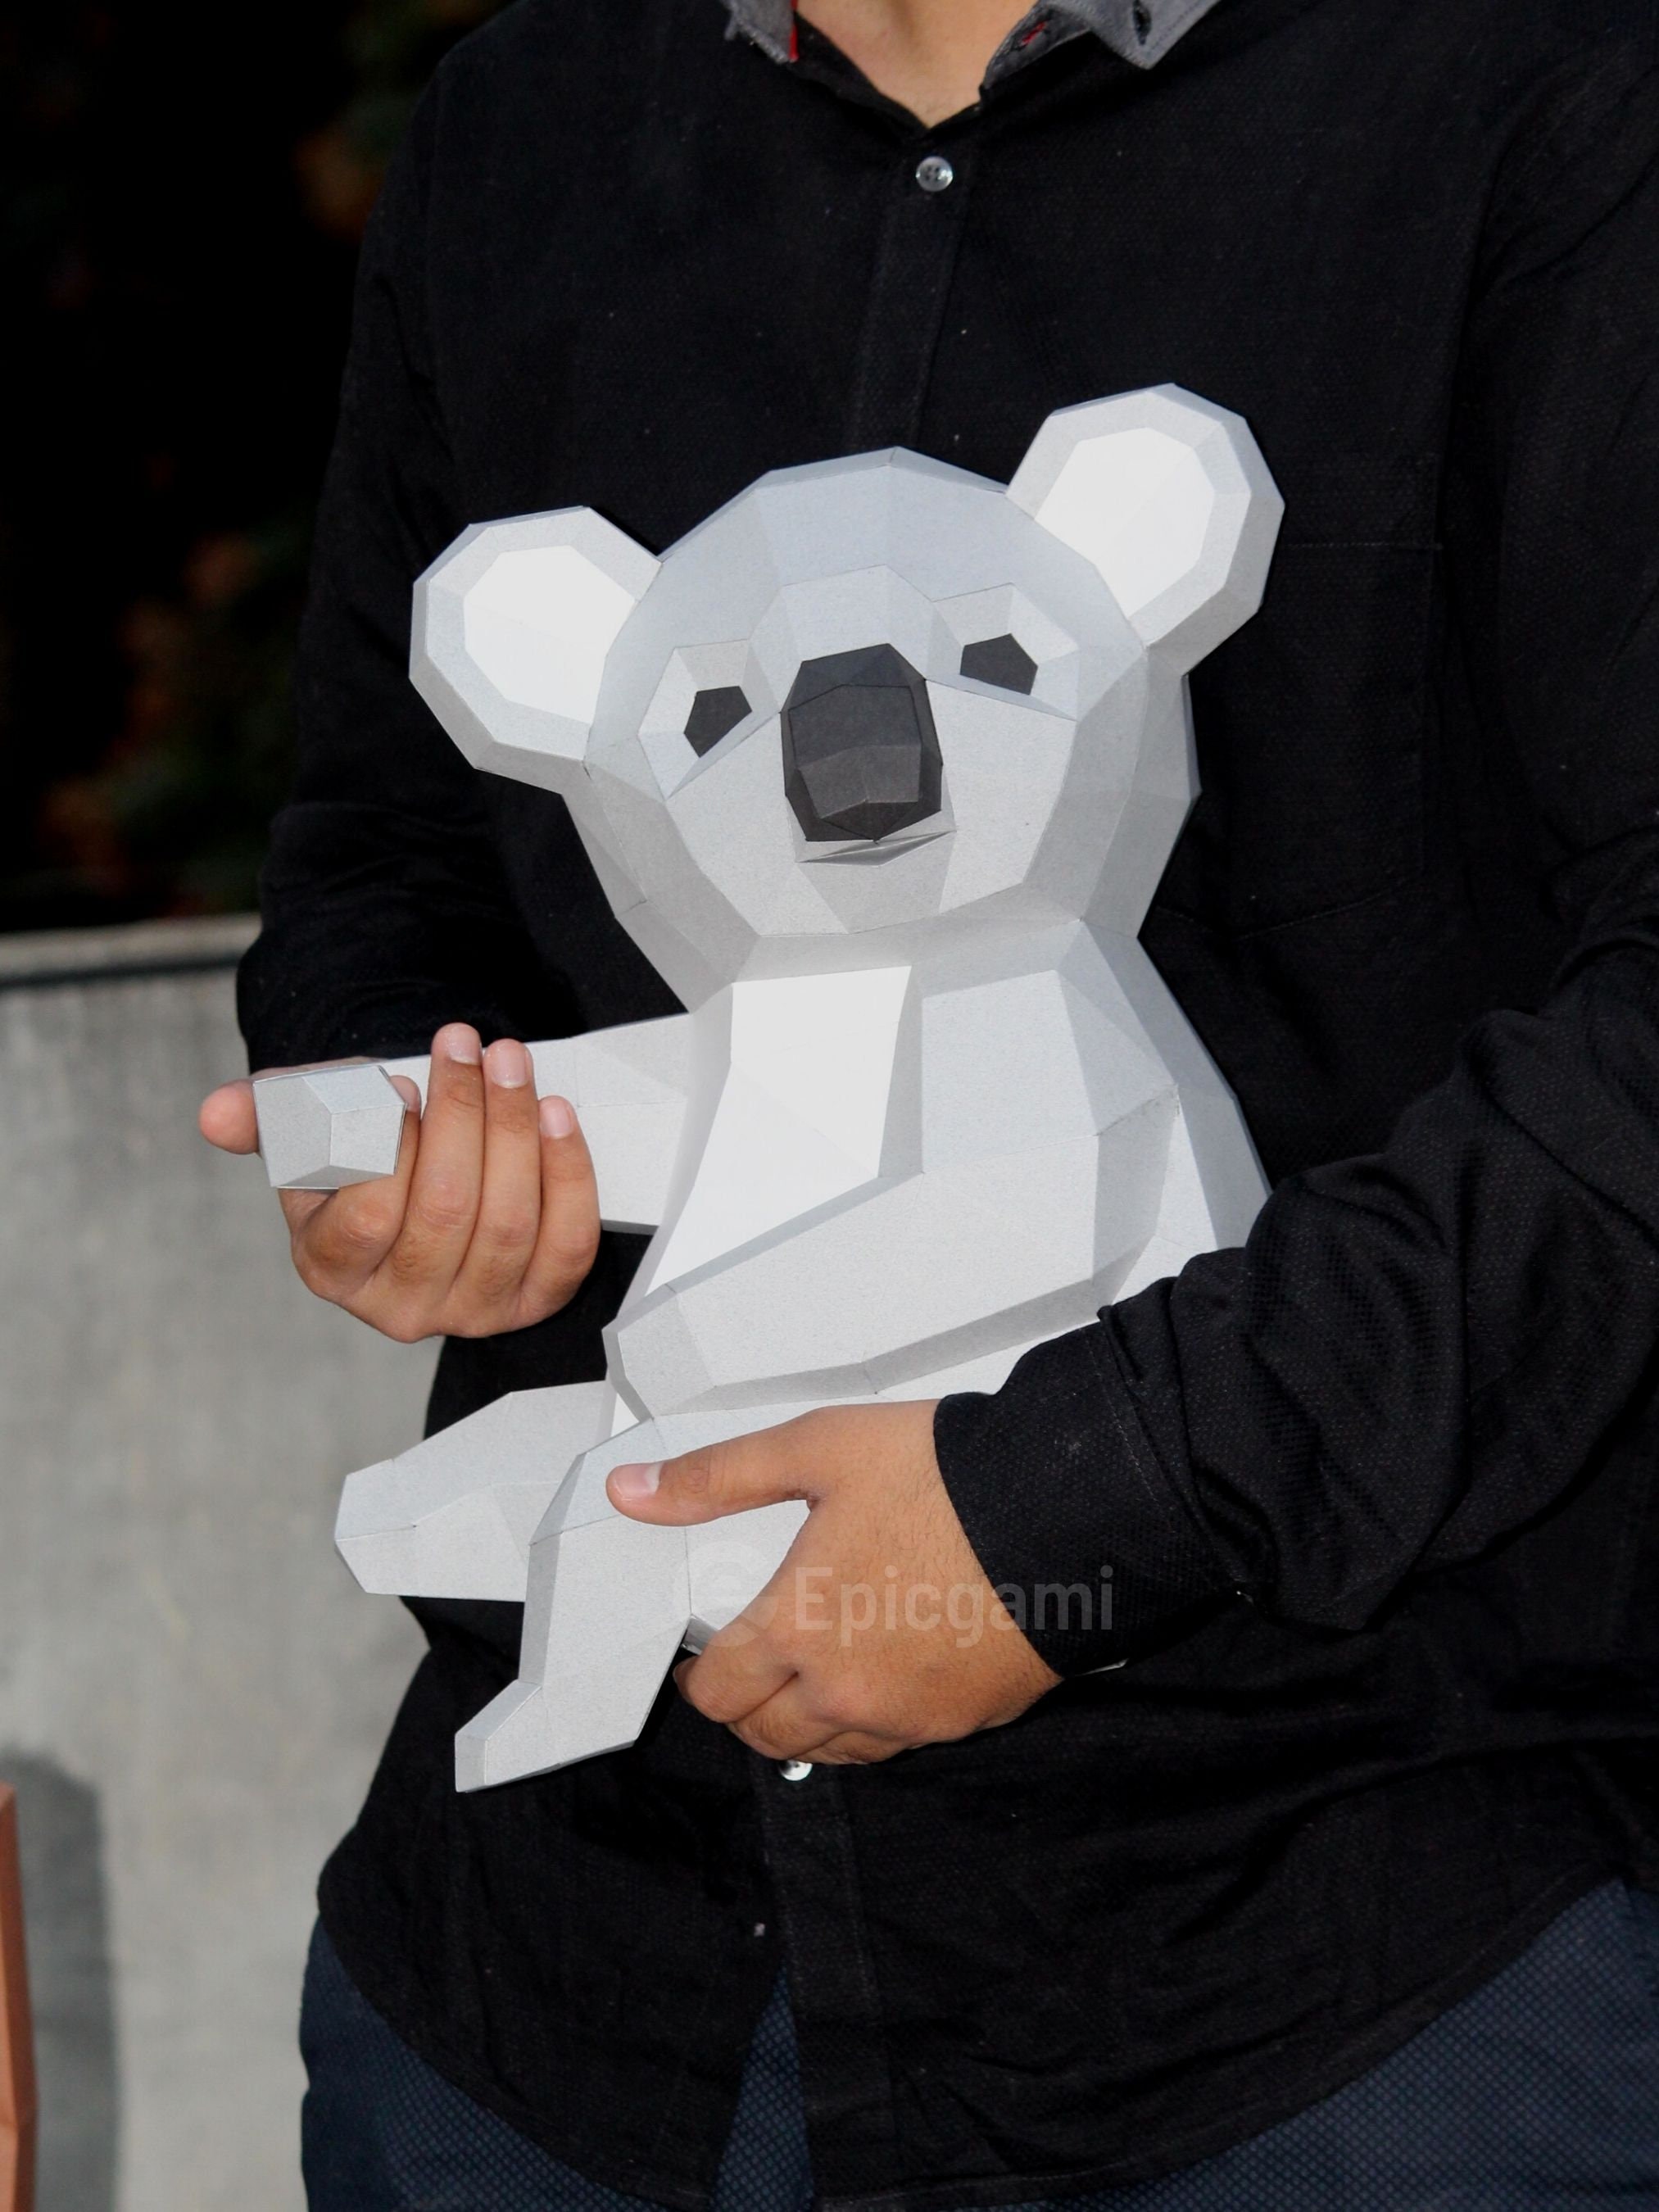 How to Make A Shirt for Your Paper Koala